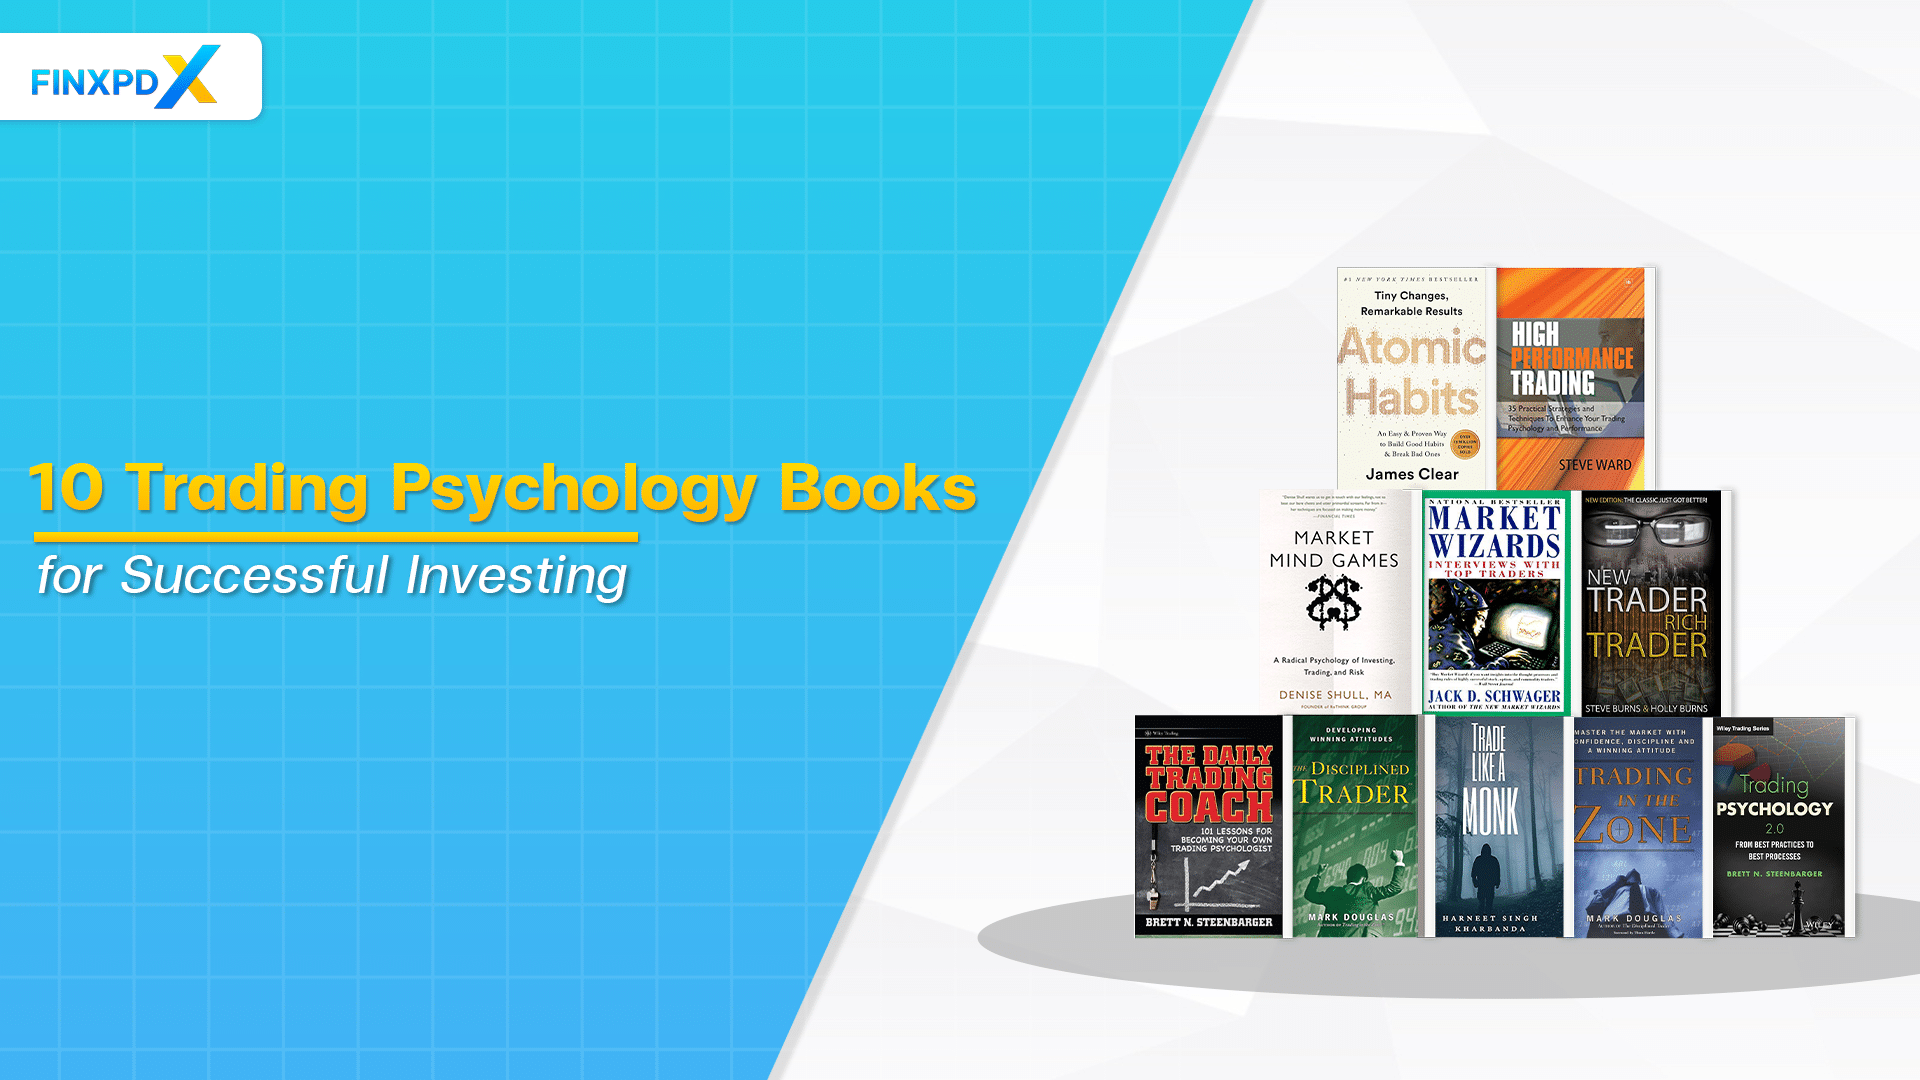 10 Trading Psychology Books for Successful Investing